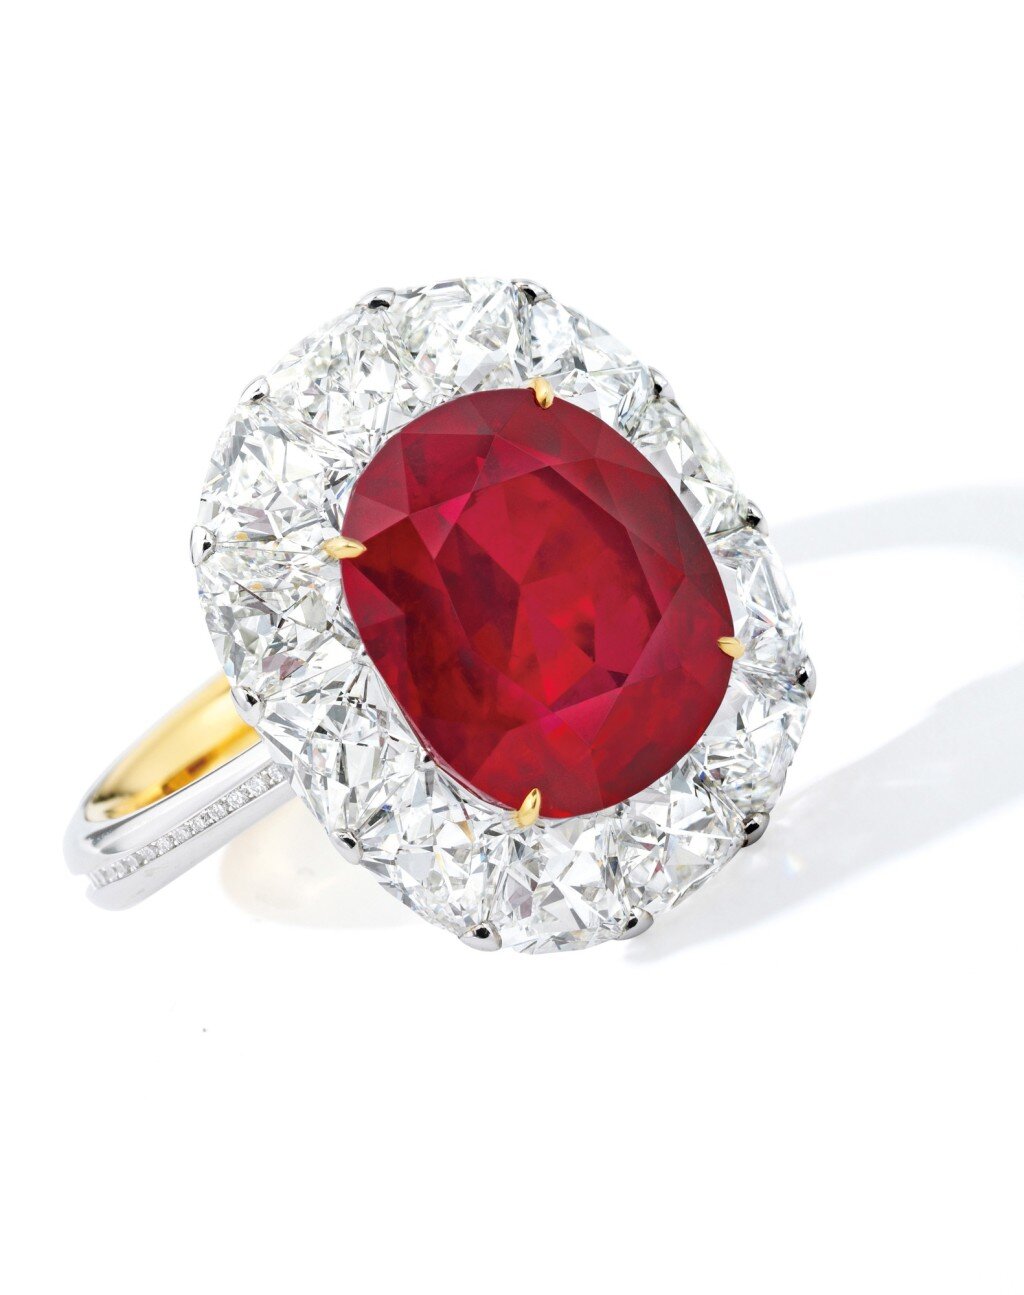 6.41 Carat, Pigeon Blood, Burmese Ruby. Image courtesy of Sotheby's